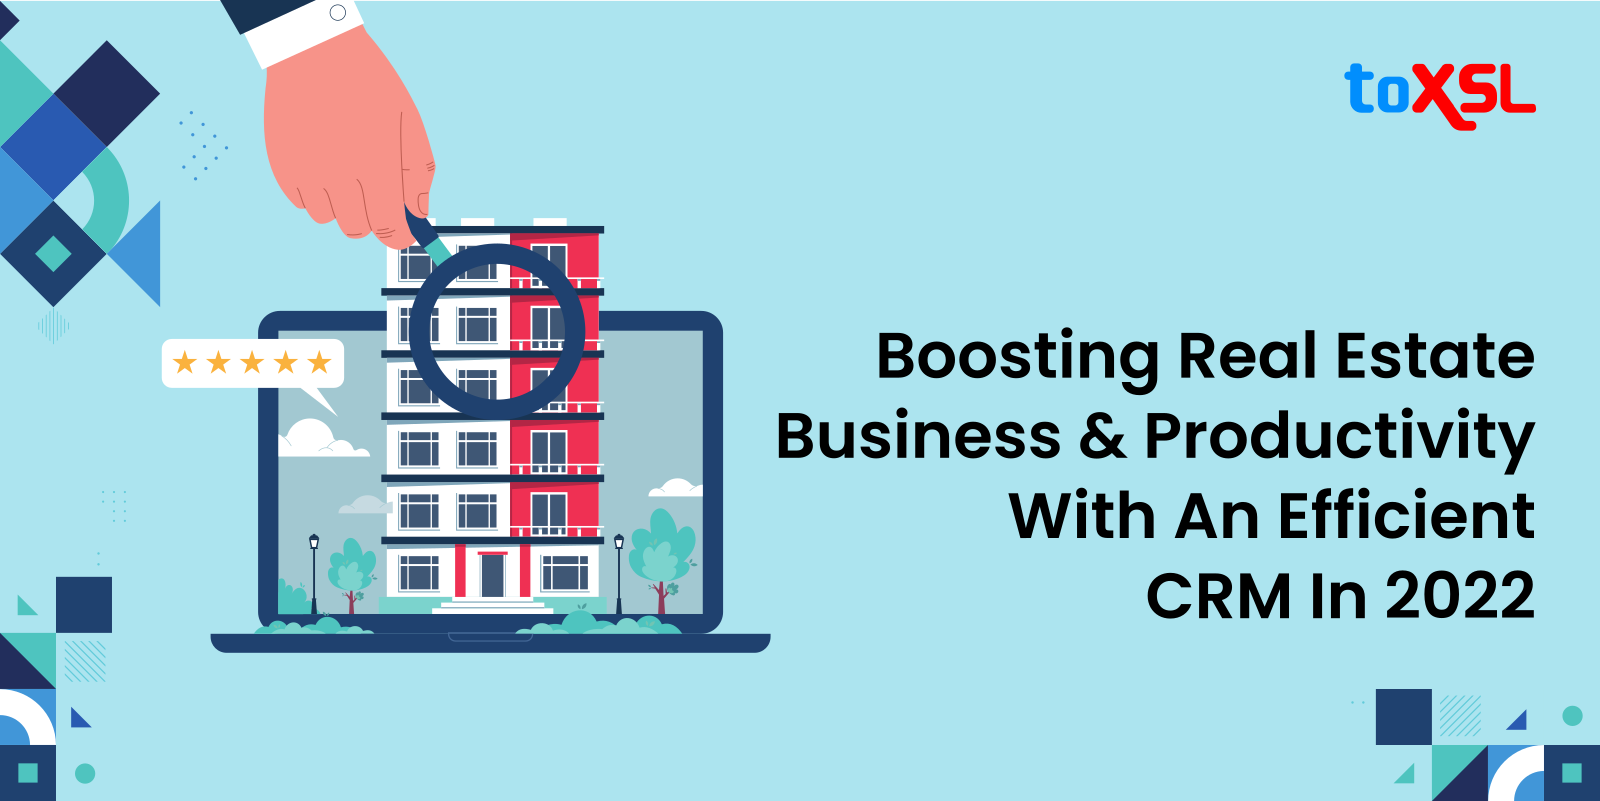 Boosting Real Estate Business And Productivity With An Efficient CRM In 2022